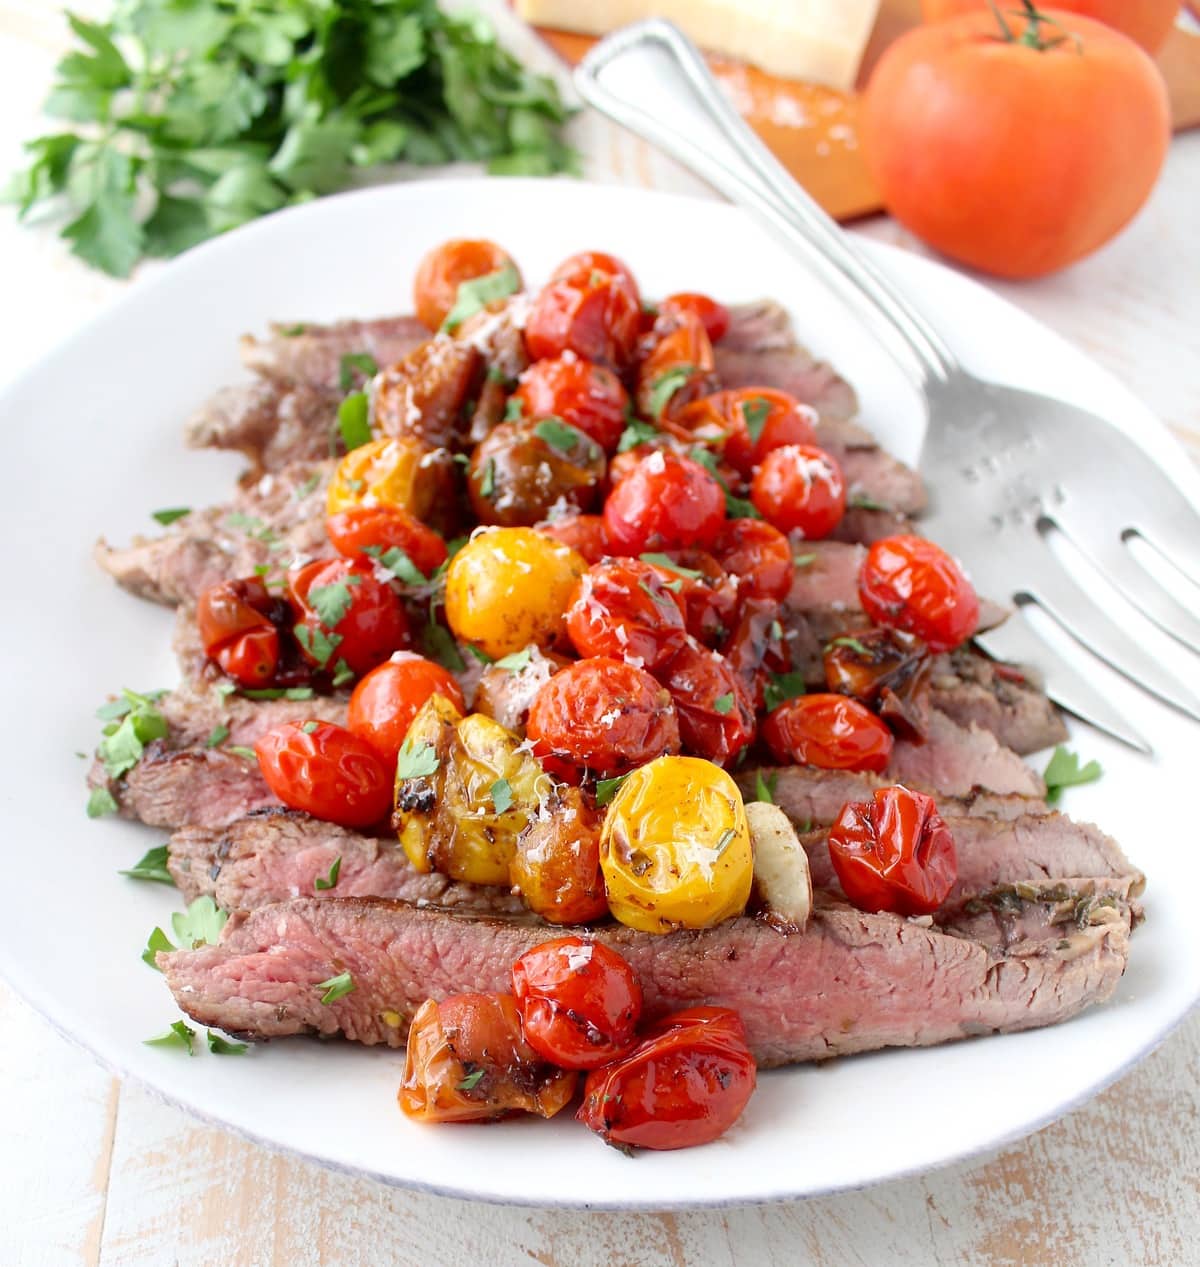 Grilled Flank Steak Recipe with Balsamic and Garlic